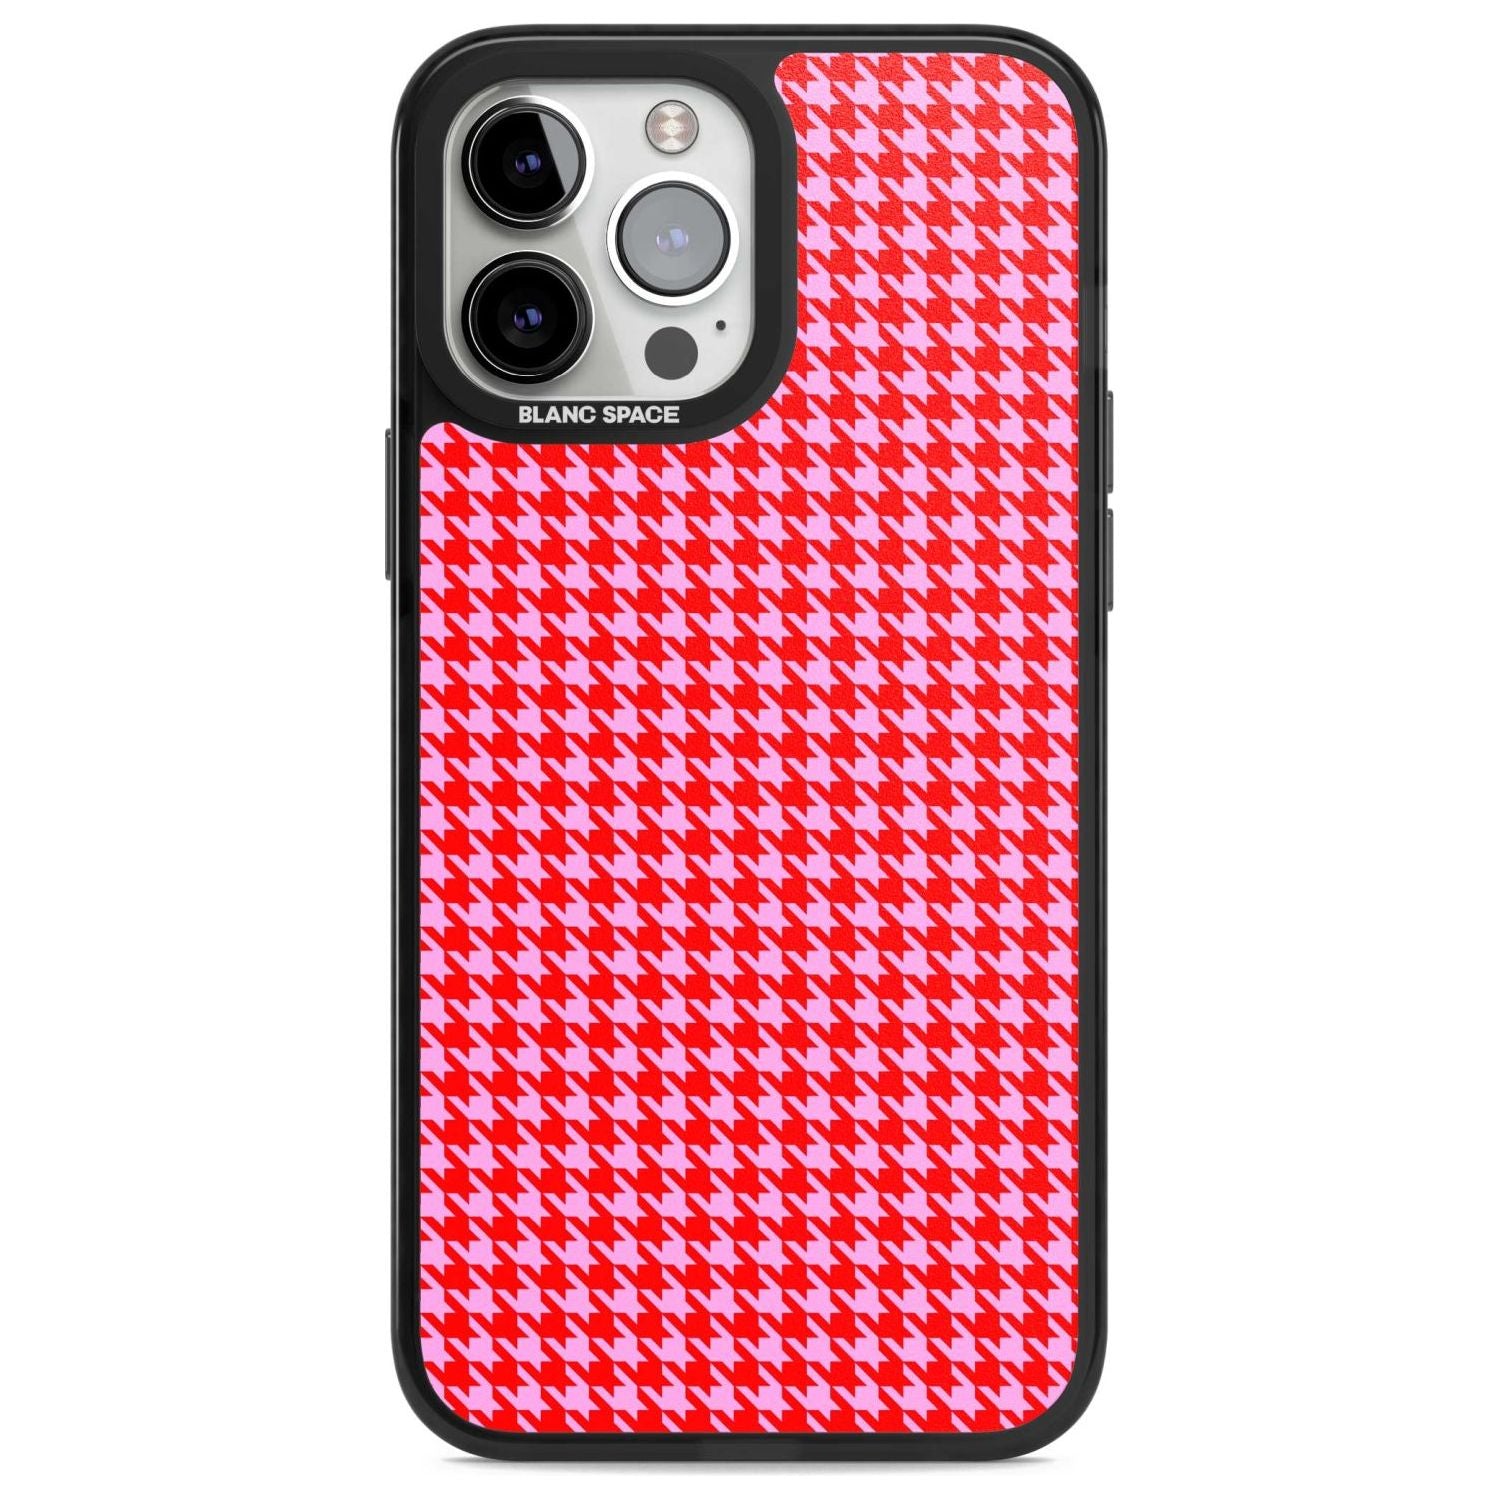 Neon Pink & Red Houndstooth Pattern Phone Case iPhone 13 Pro Max / Magsafe Black Impact Case Blanc Space